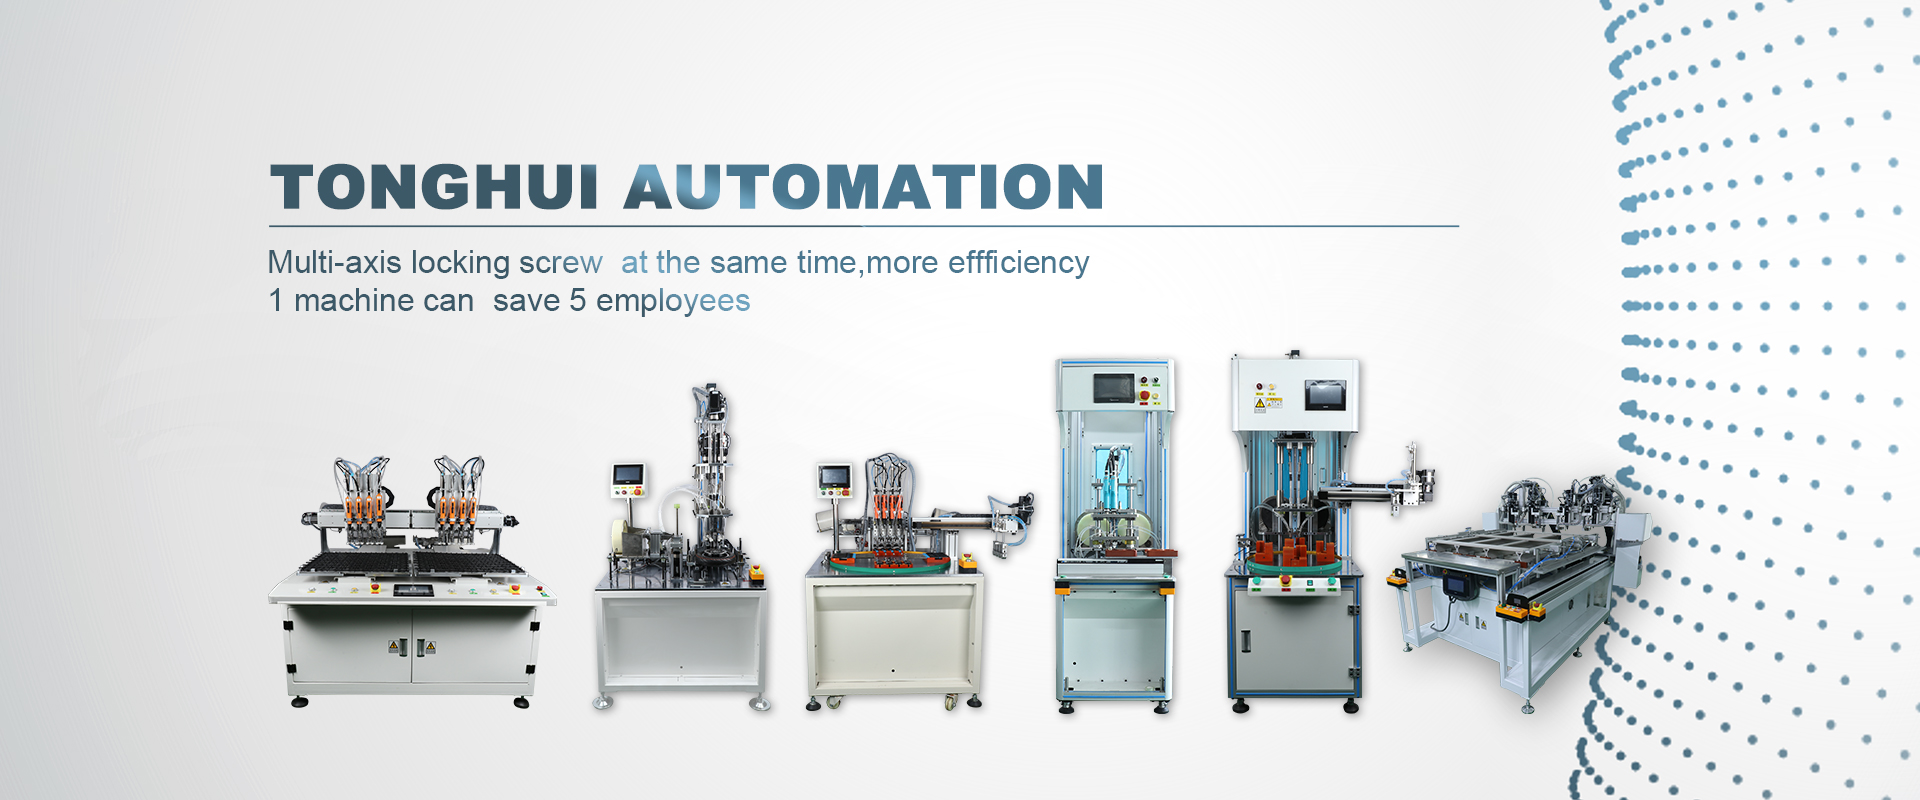 Tonghui Non-standard customized automatic dispensing, screwing, bending, assembly, all-in-one machine